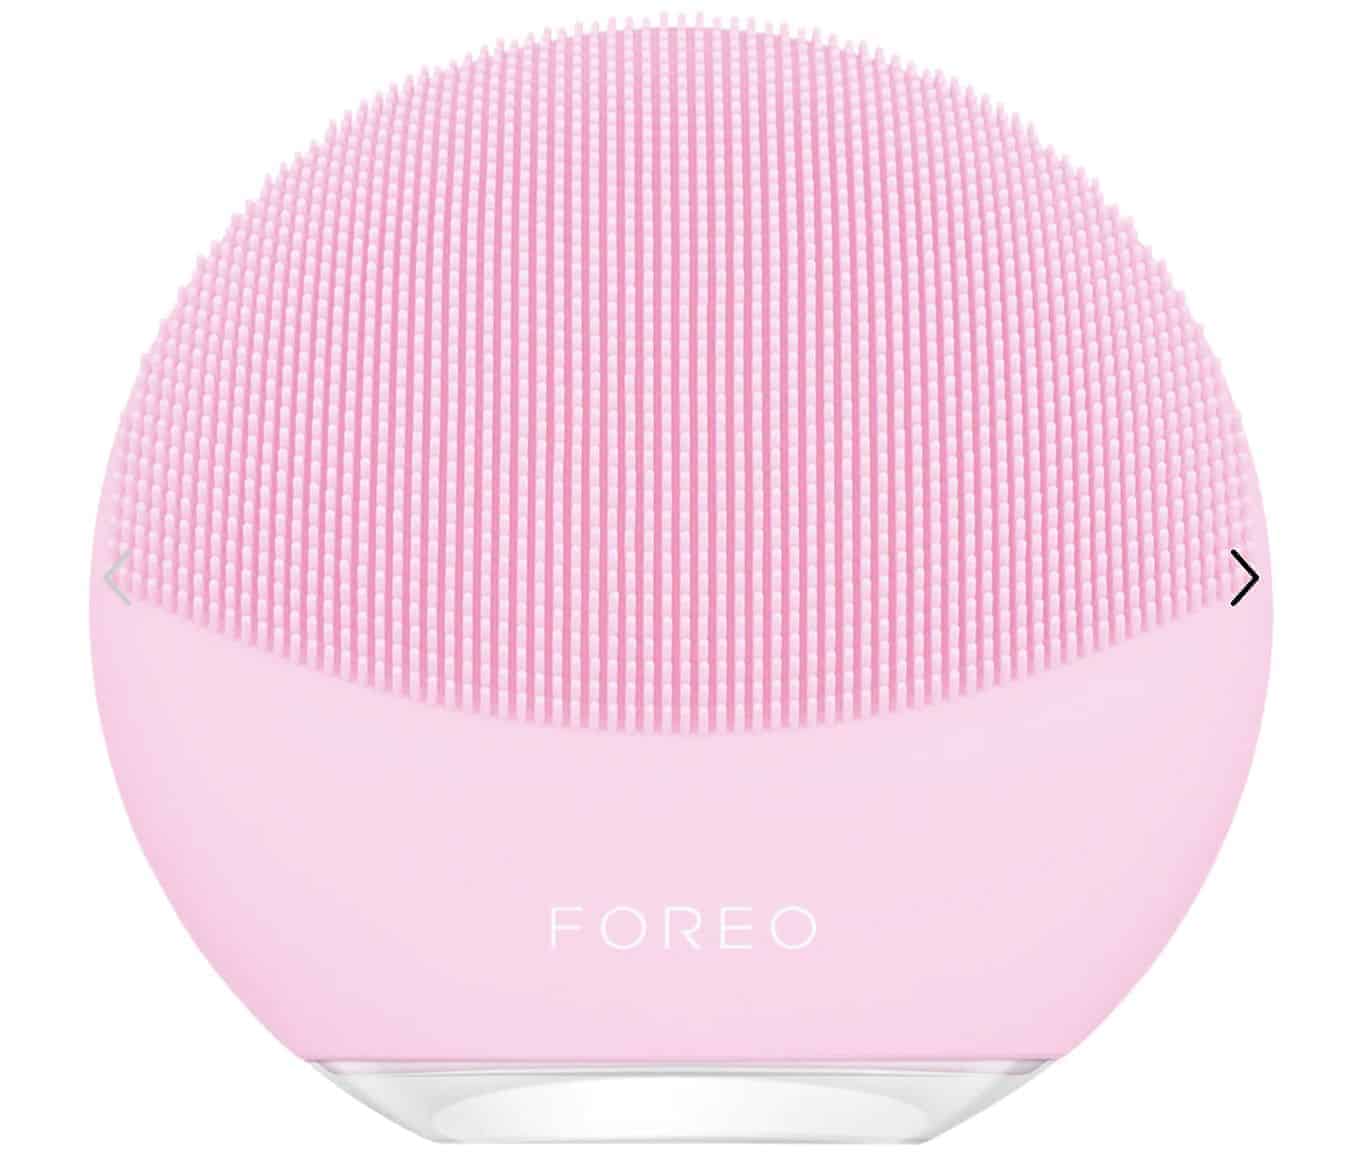 luna-foreo-facial-cleansing-device-gift-ideas-for-mothers-day